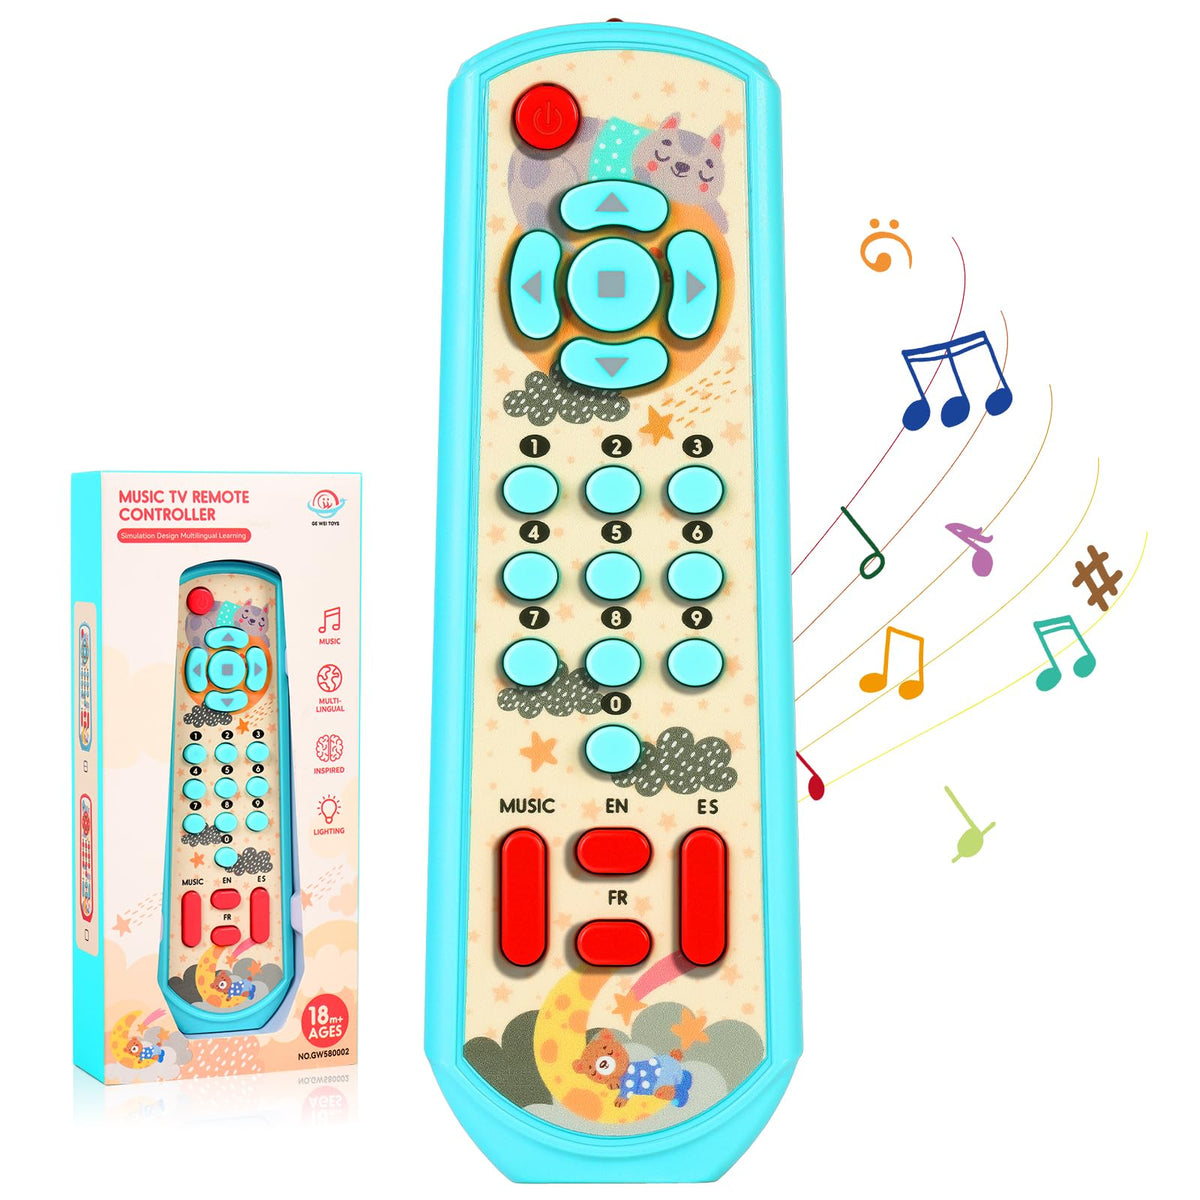 Aolso Toy Remote Control, Baby TV Remote Control Toys Educational Toys, Baby Remote Control Toy Learning Musical Sensory Toy for Toddler 6-18 Months 1-3 Year Old Boys Girls, Blue